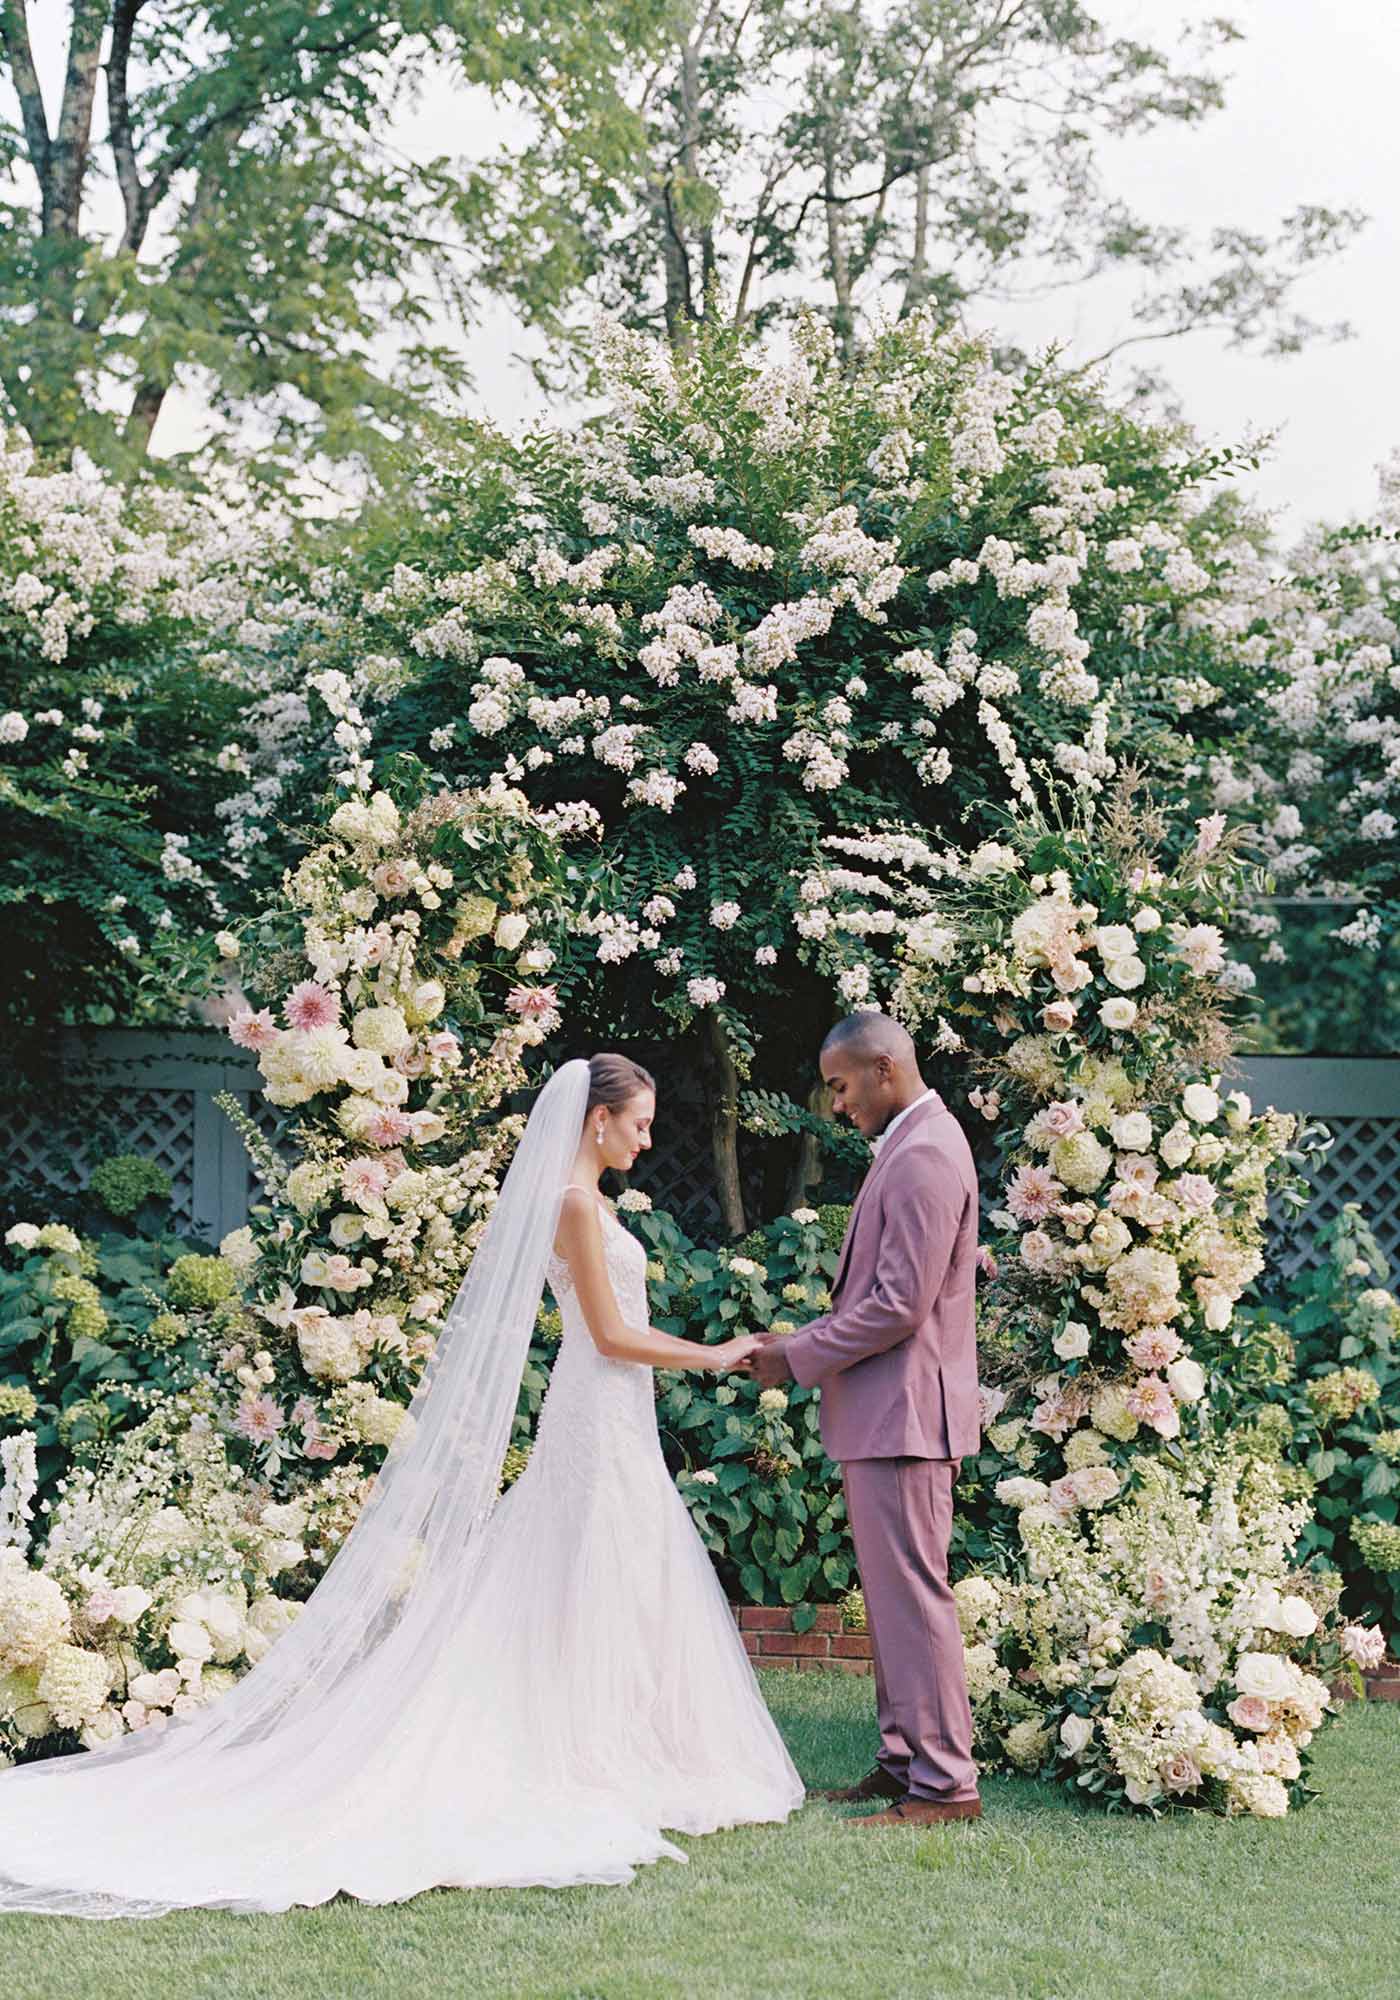 The Clifton Inn styled wedding shoot, Photography by Hana Gonzalez, Styled by Karen Duckett Events, Flowers by Floral & Bloom